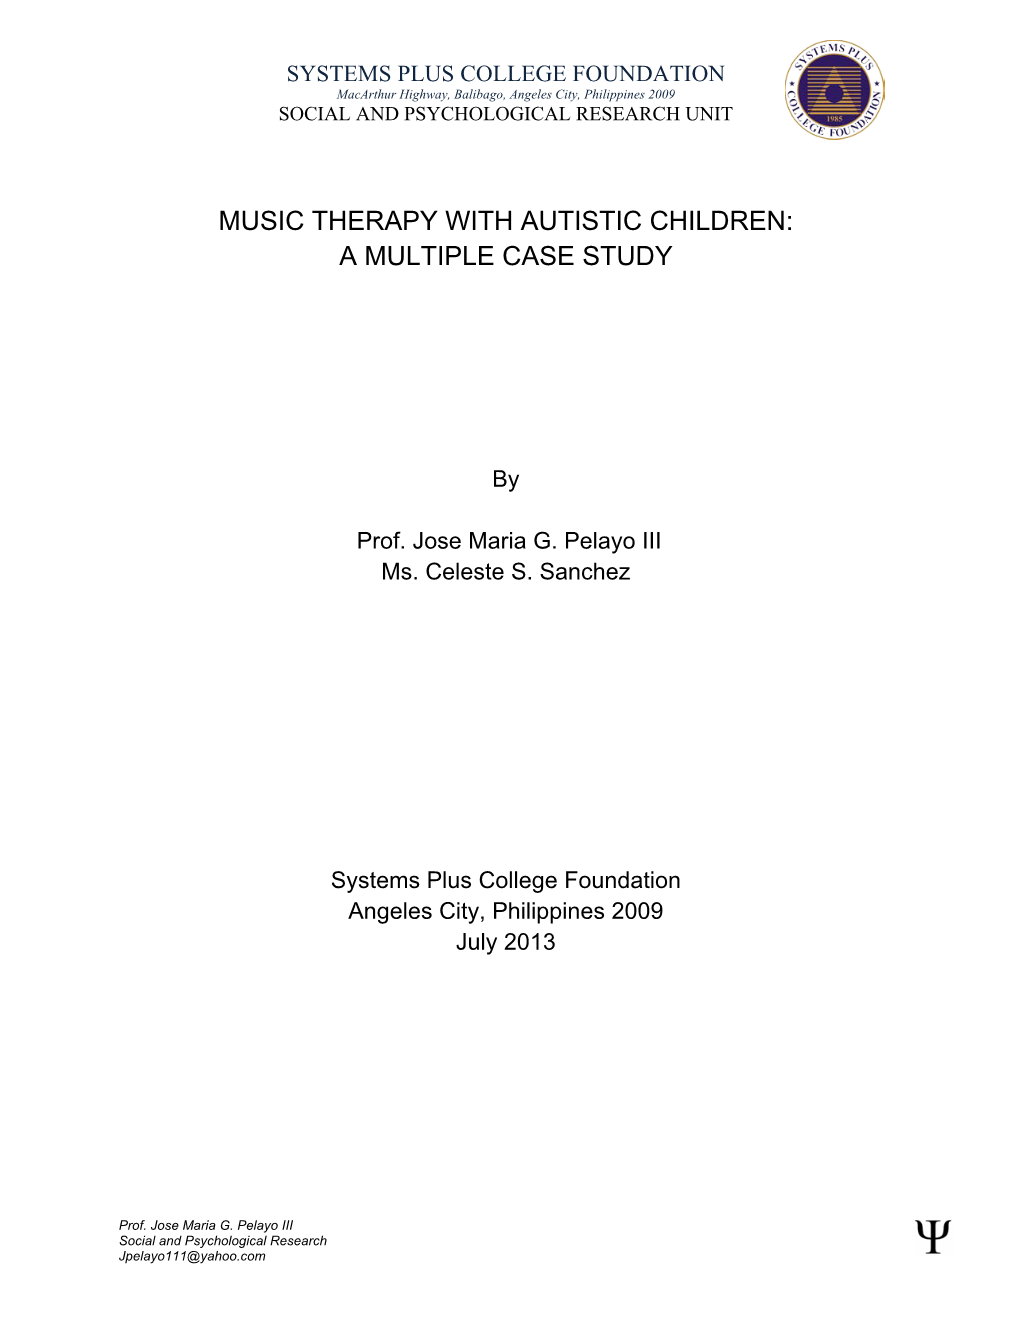 Music Therapy with Autistic Children: a Multiple Case Study